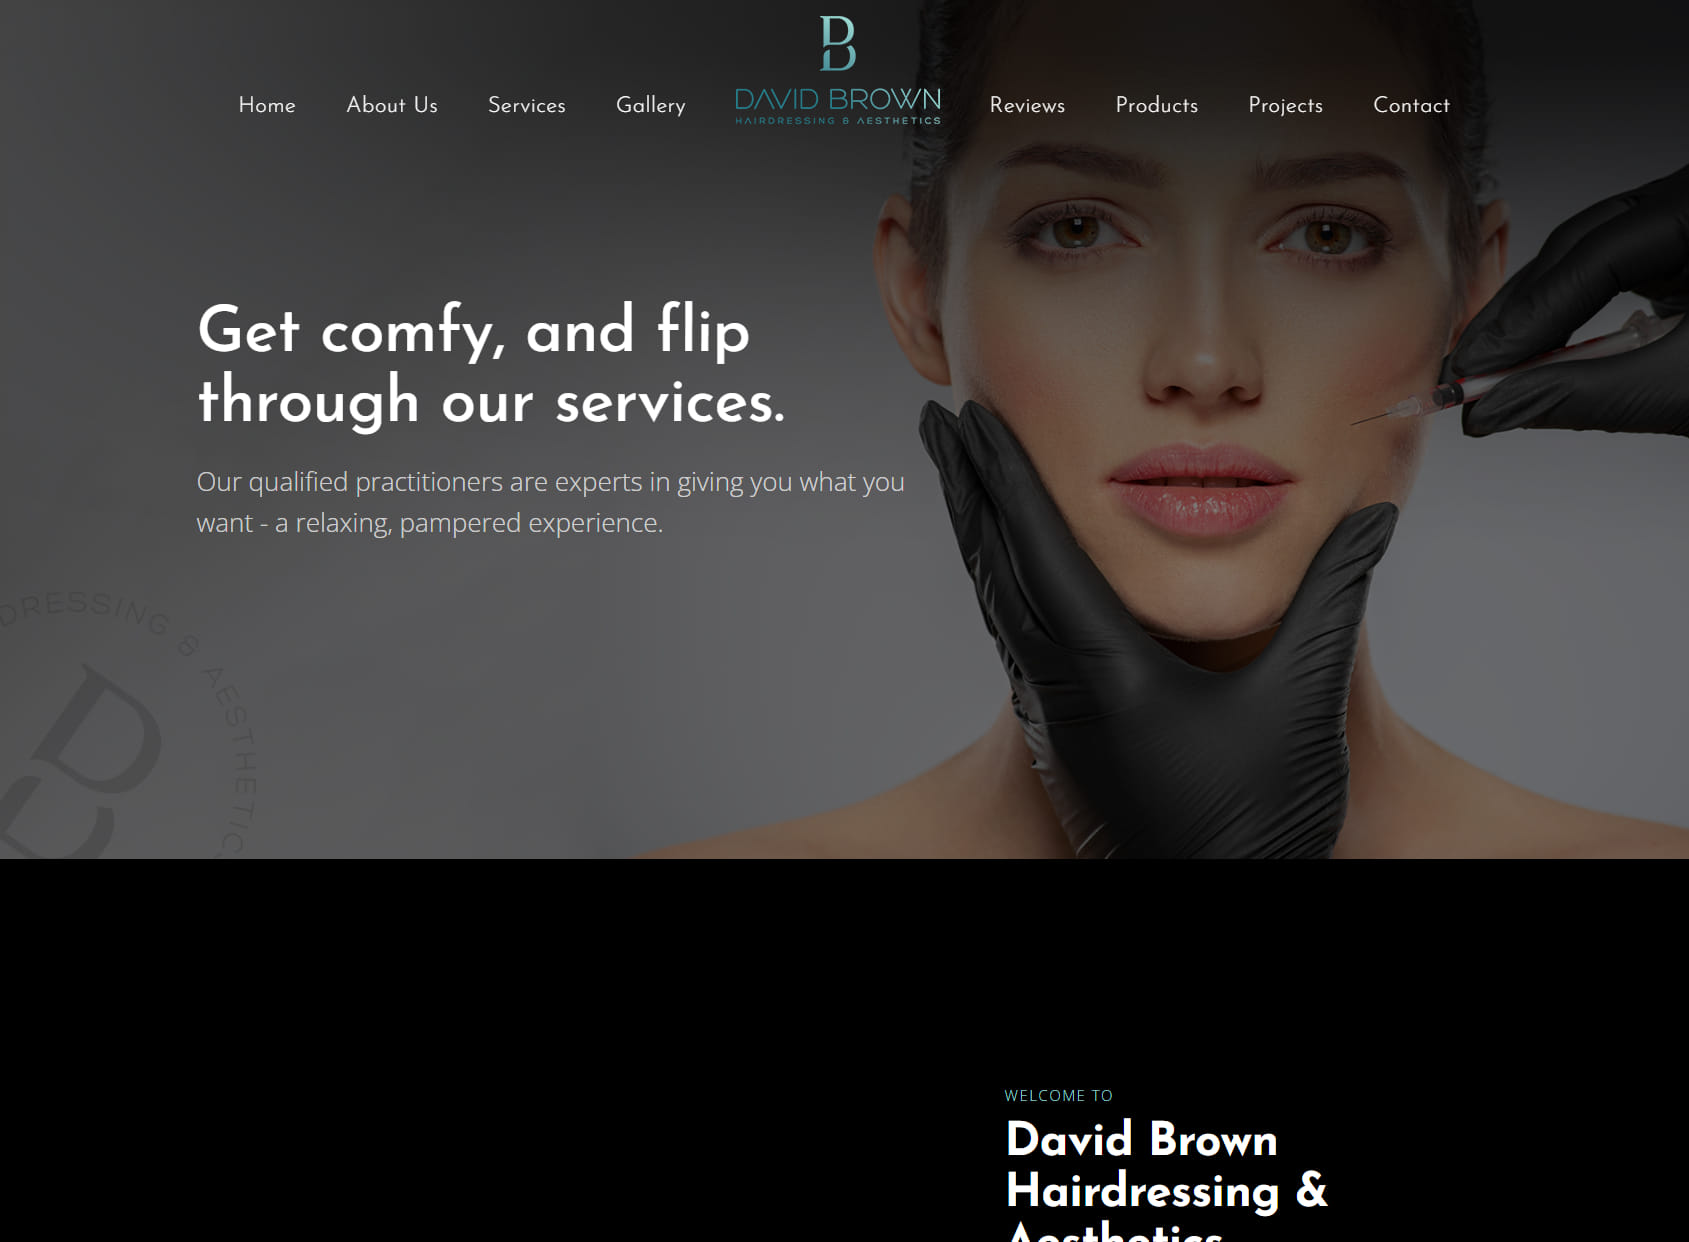 David Brown Hairdressing and Aesthetics